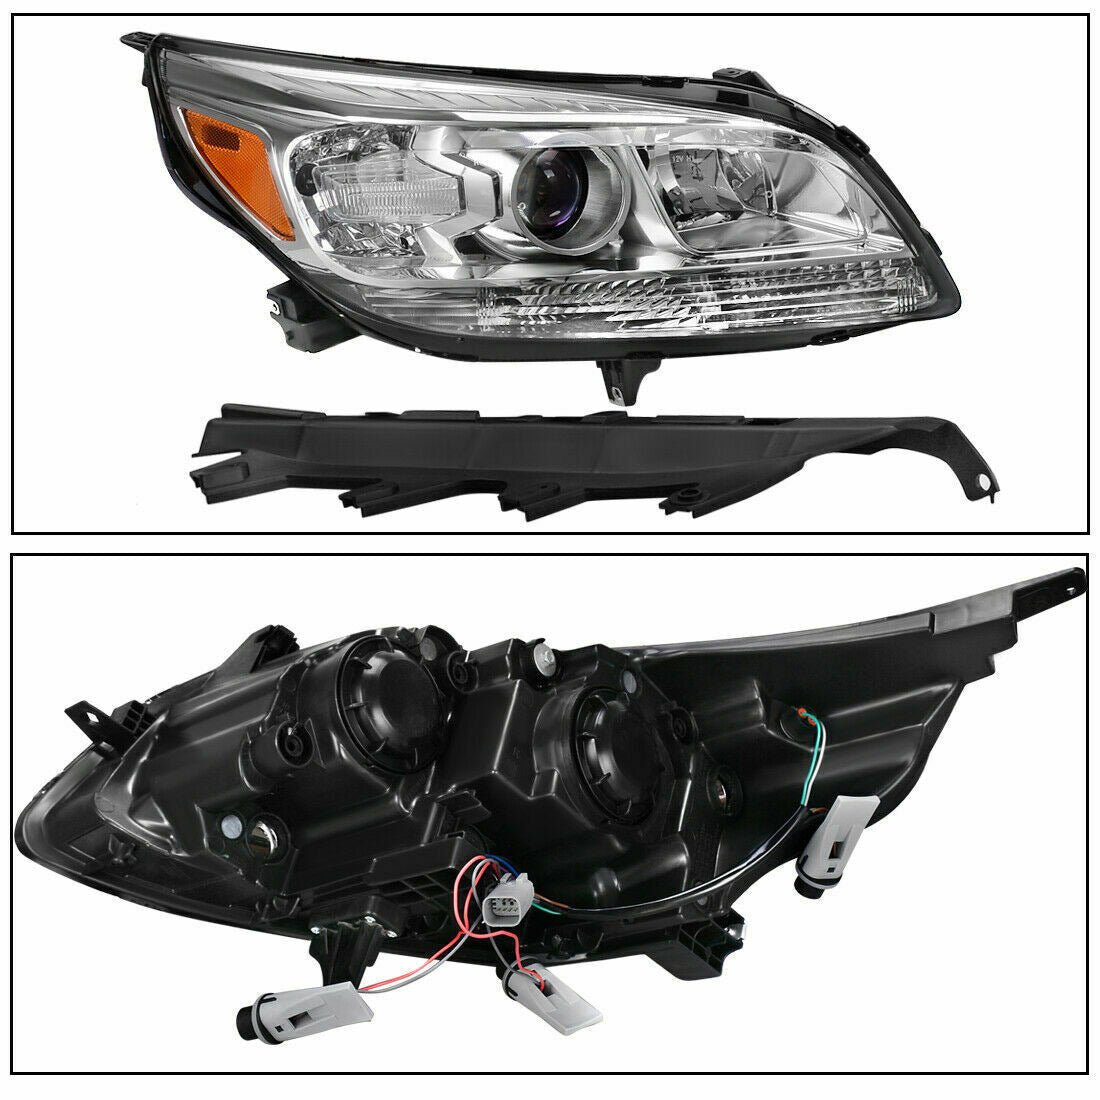 Set 2 Projector Headlights Headlamps For 2013 2014 2015 Chevy Malibu Front Lamps